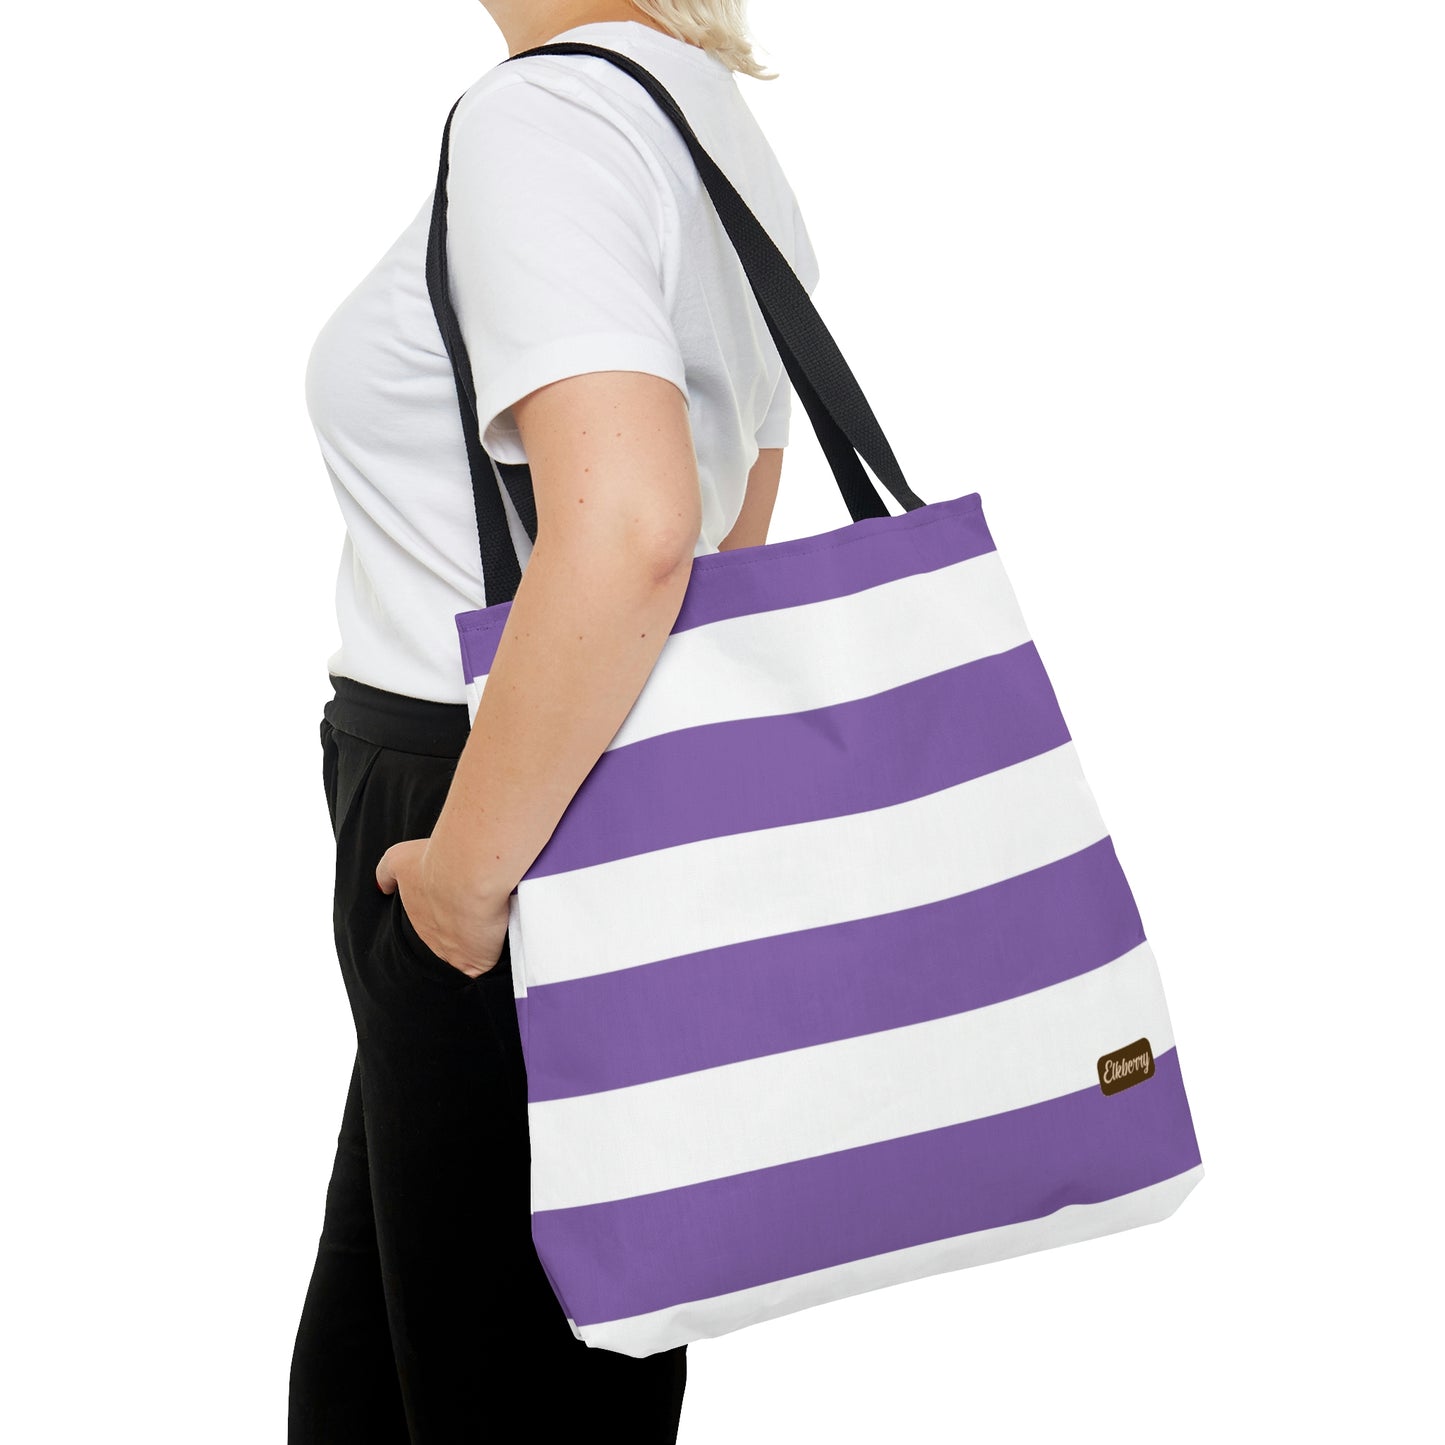 Lightweight Tote Bag - Lilac/White Stripes